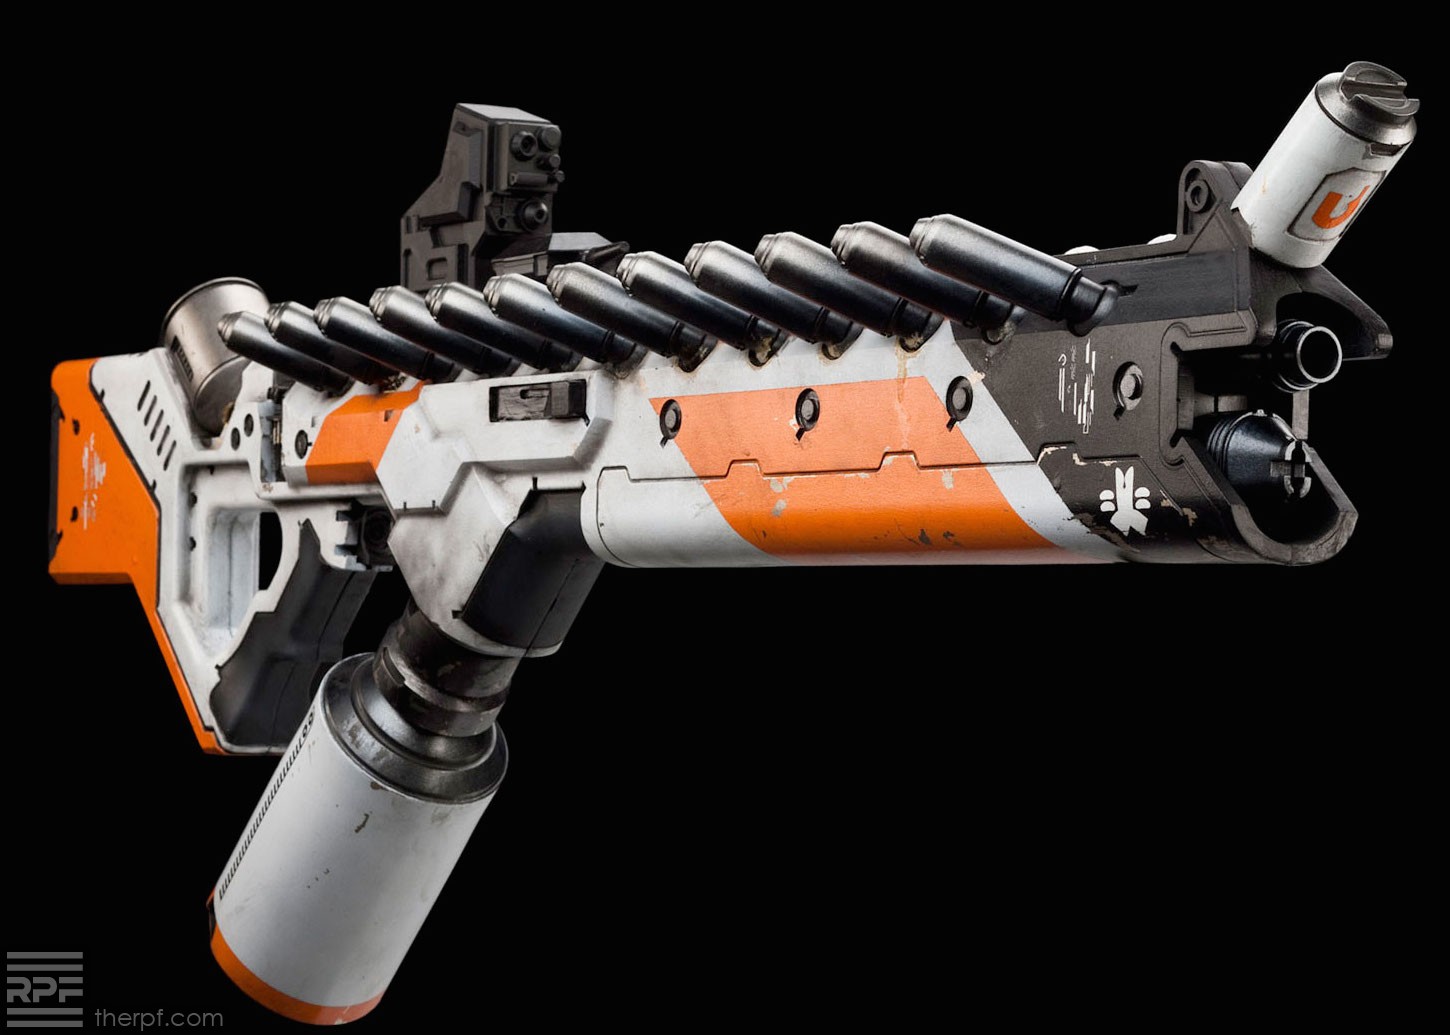 Assault Rifle from The Art of District 9